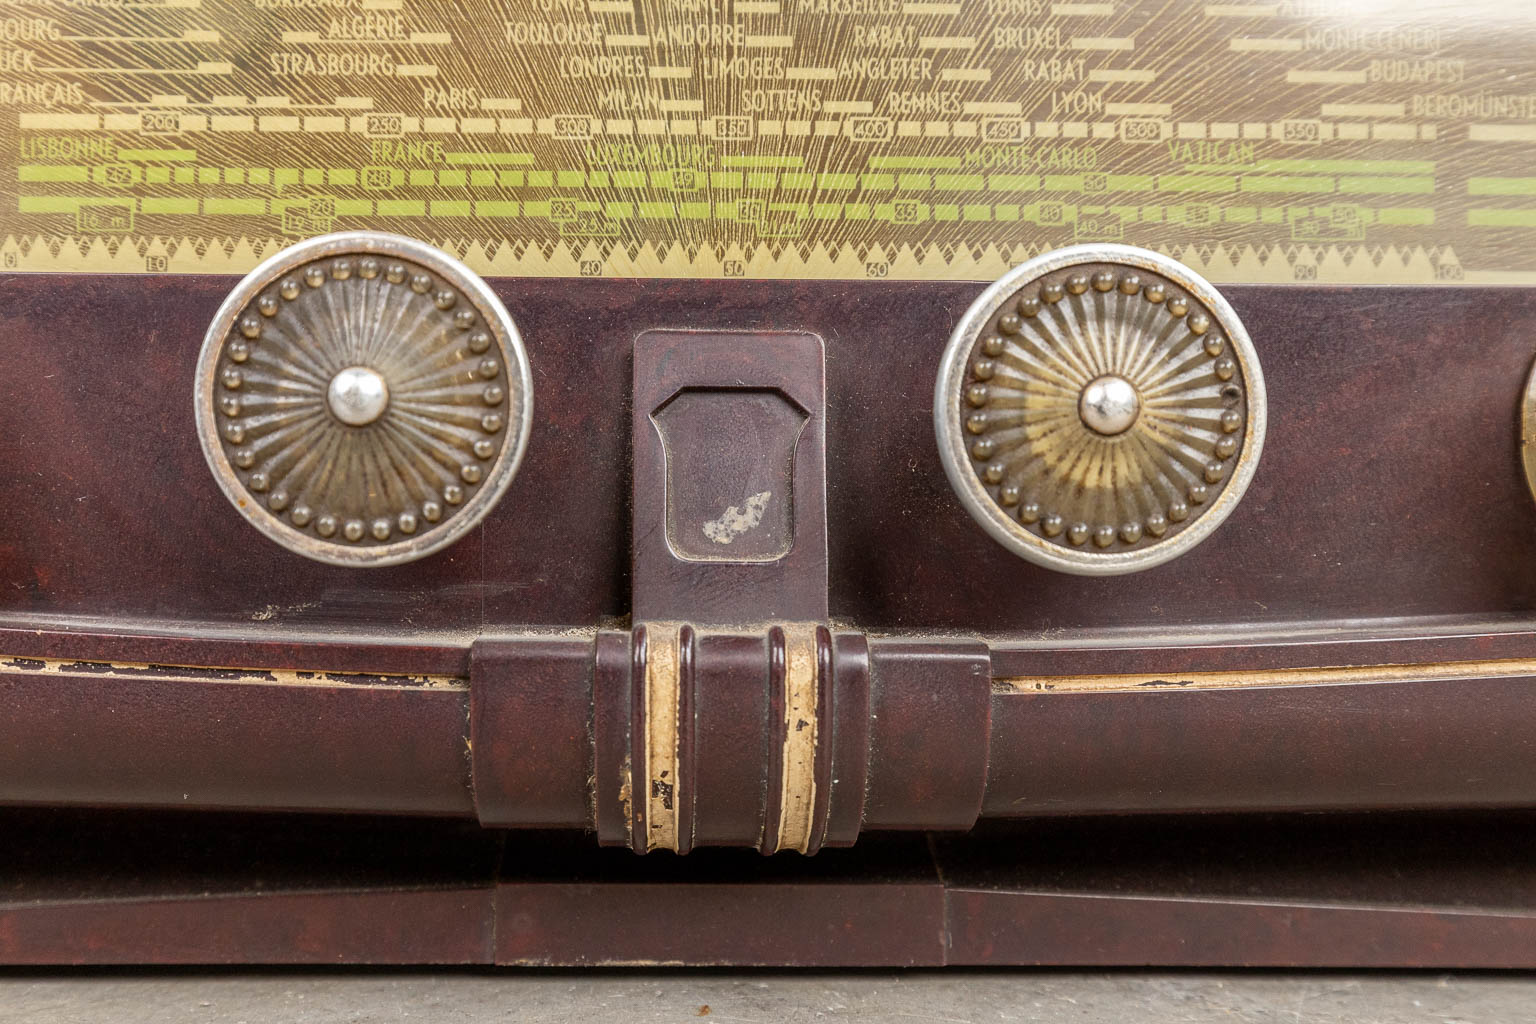 A collection of 2 antique radio